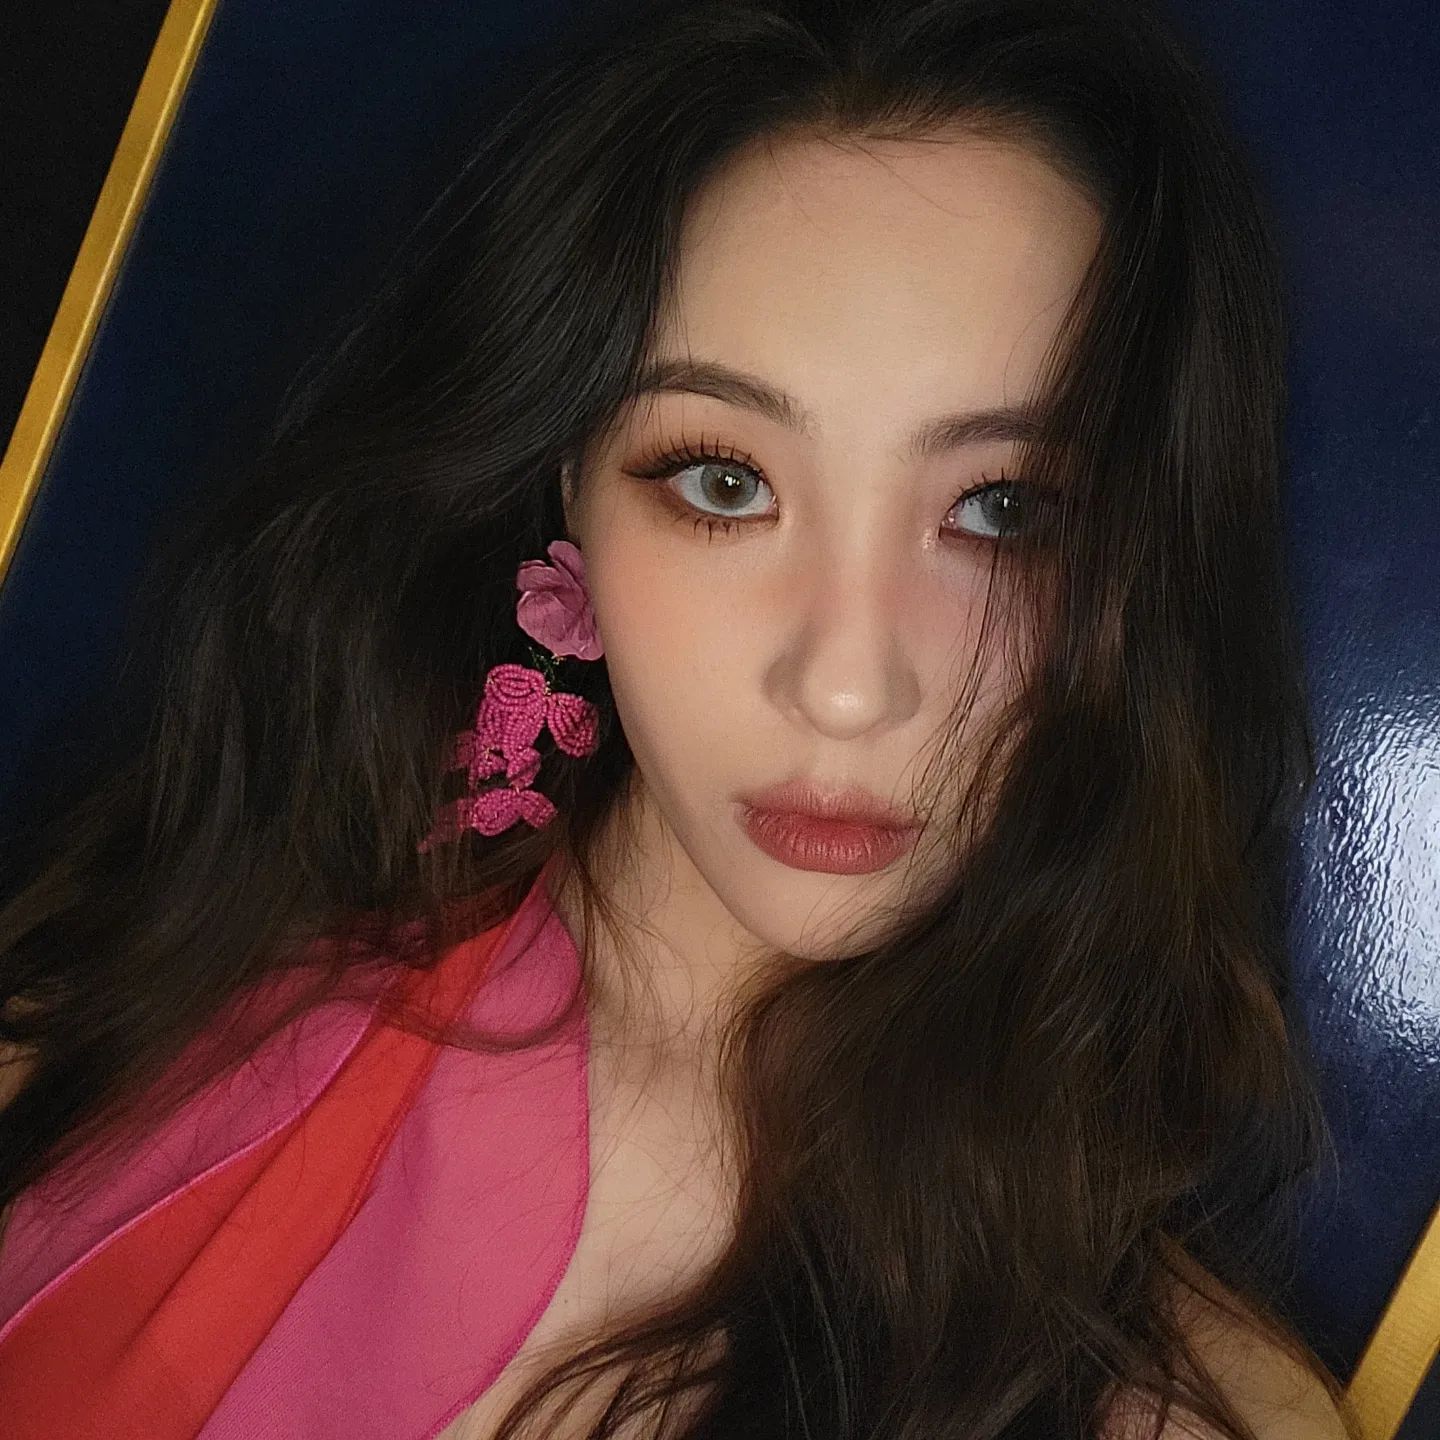 Sunmi, a sexy 45.6kg skinny body up to the collarbone.. Her face is like a cat